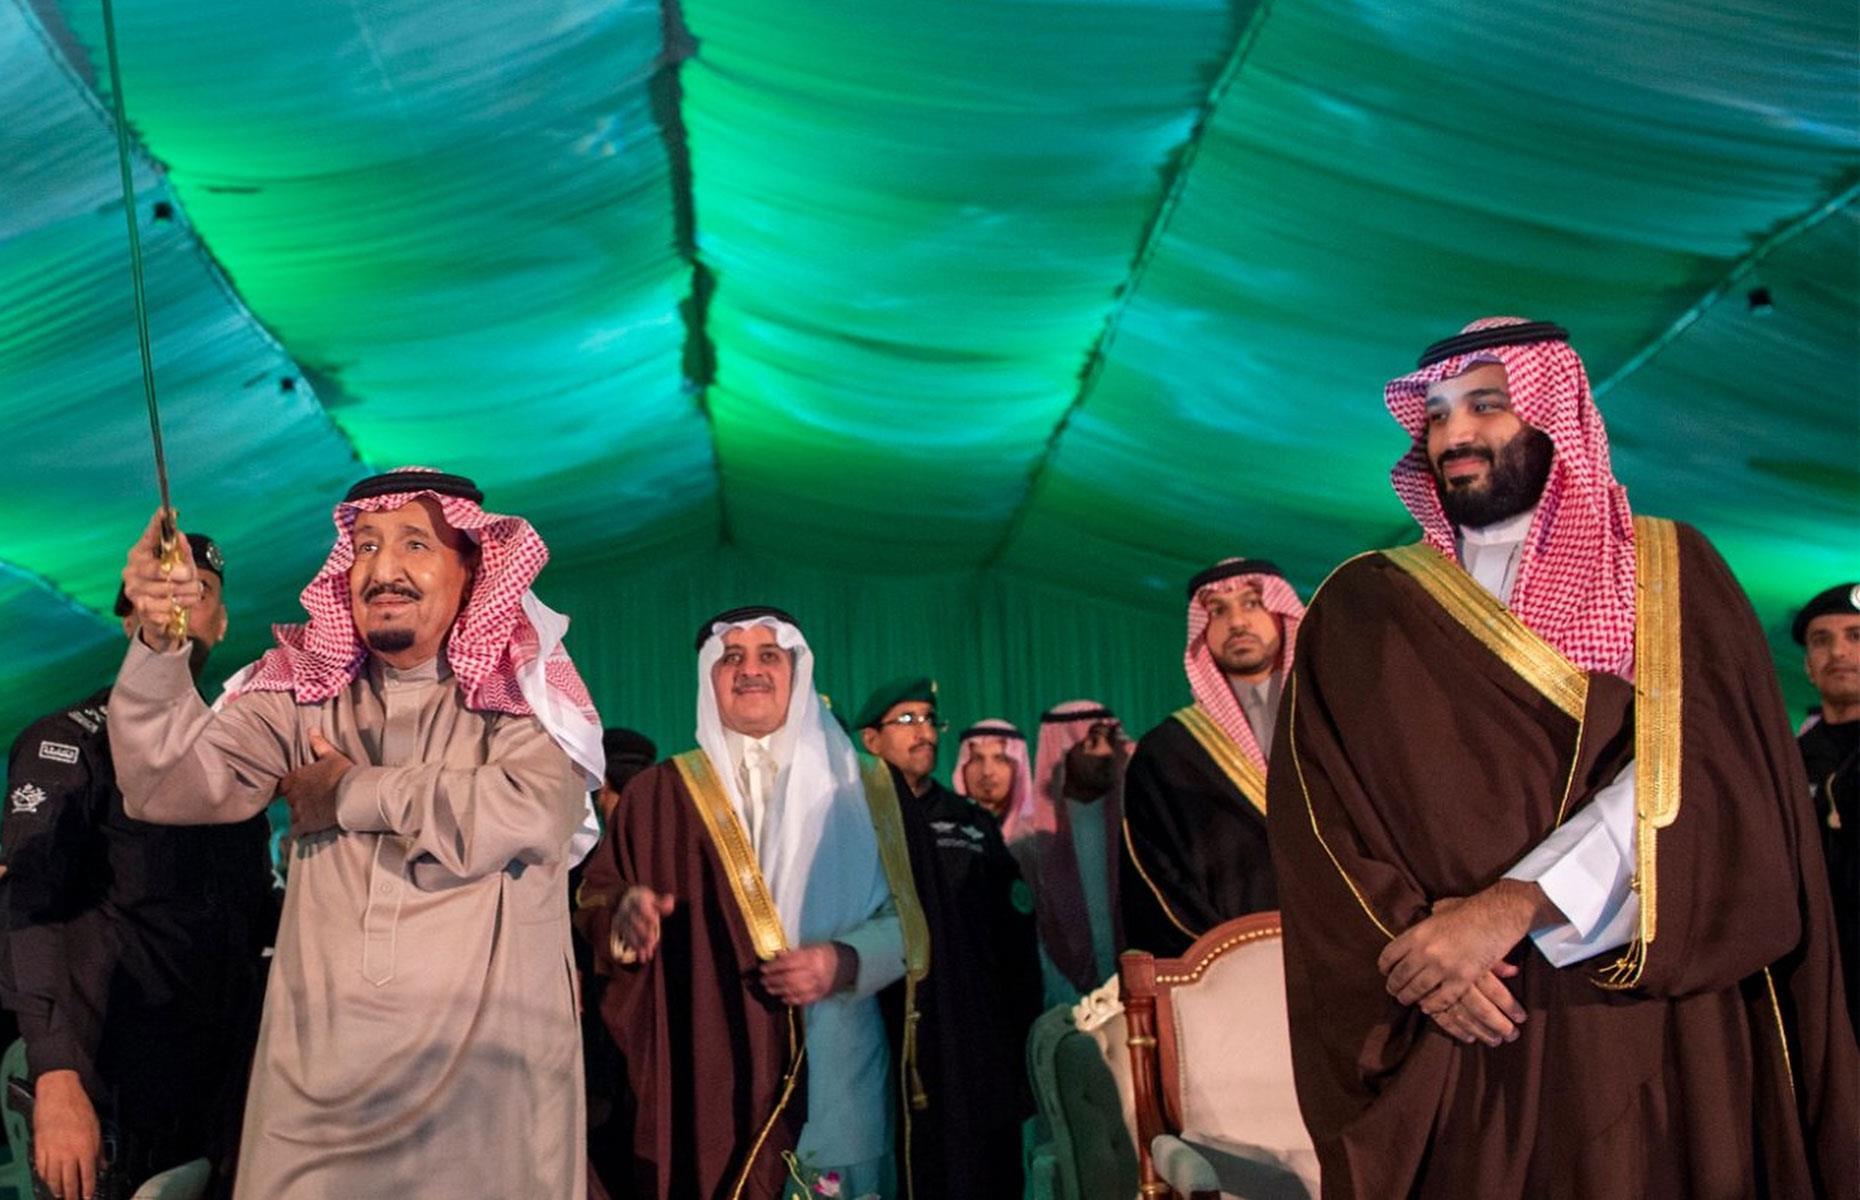 <p>The richest family in the world by a long shot, the royal House of Saud, which has ruled the country that bears its name since 1744, is estimated to be worth an absolutely eye-watering $1.4 trillion.</p>  <p>This almost-unimaginable wealth is spread out among the gigantic family's 15,000 or so members, but a good chunk of the family fortune is held by the current King Salman, his controversial son Crown Prince Mohammad bin Salman (pictured here together), and their close relatives.</p>  <p><strong>Discover more about <a href="https://www.lovemoney.com/news/71850/the-worlds-richest-royal-families-enormous-wealth-revealed">the world's richest royal families</a></strong></p>